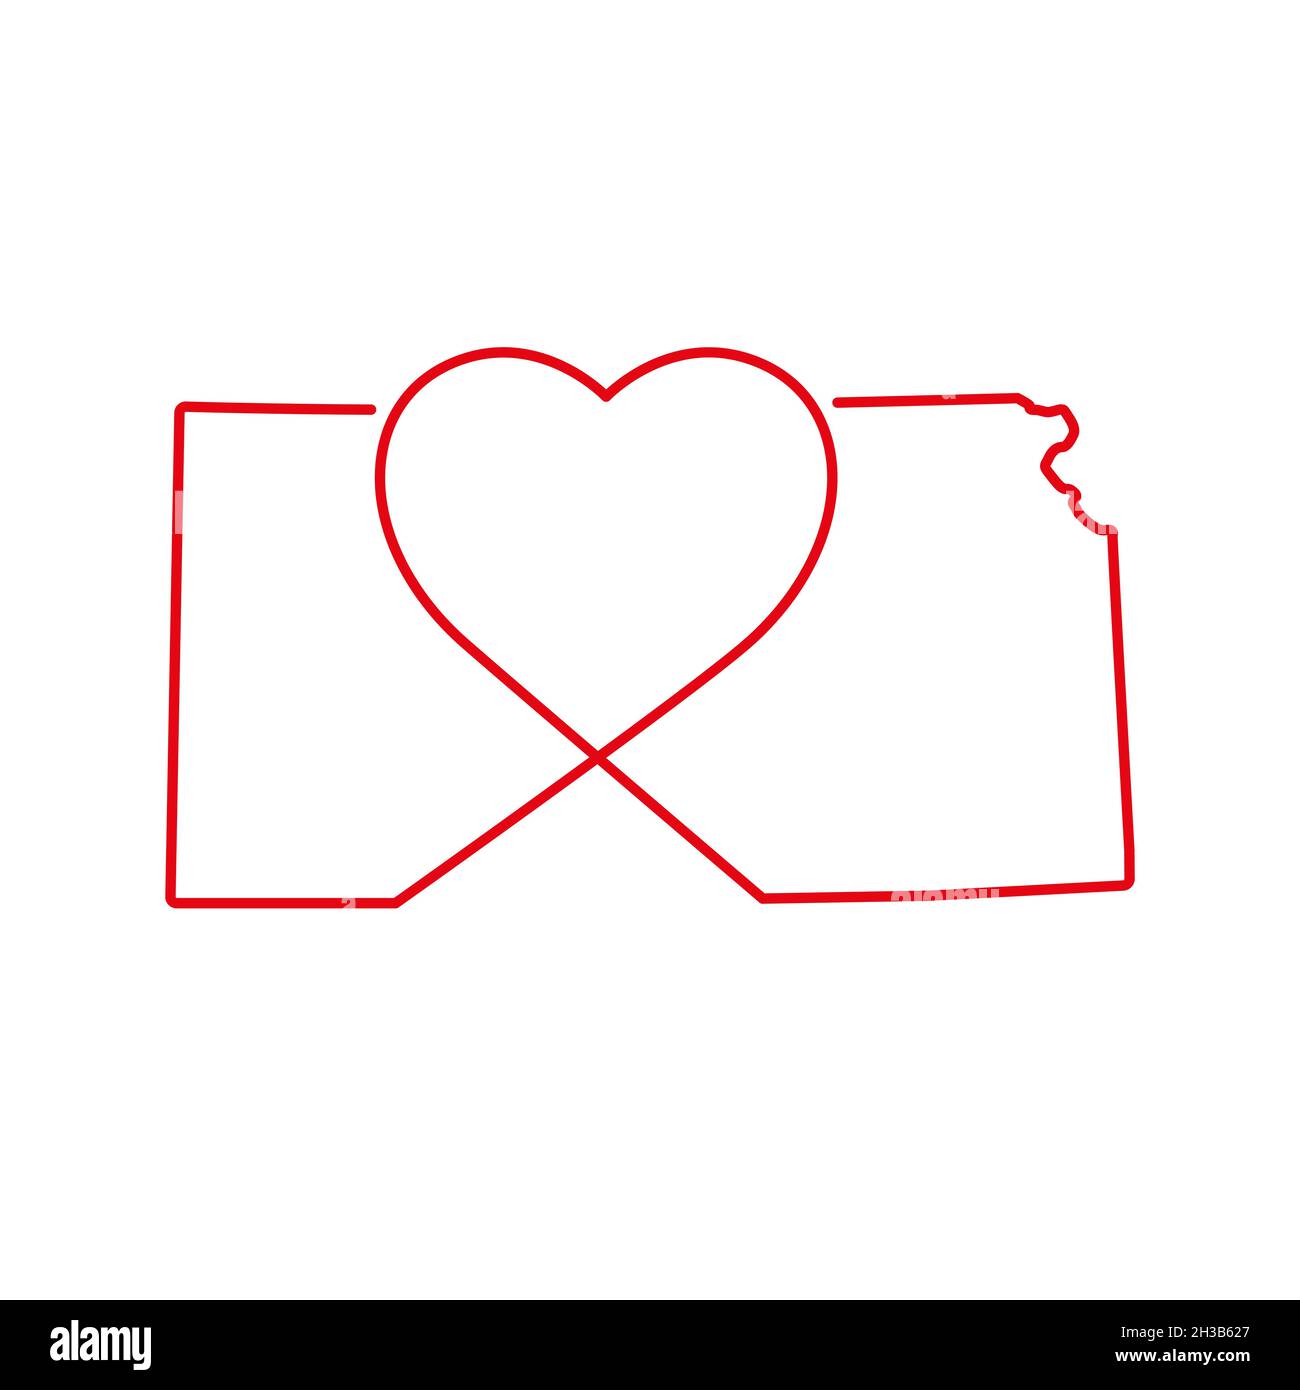 Kansas US state red outline map with the handwritten heart shape ...